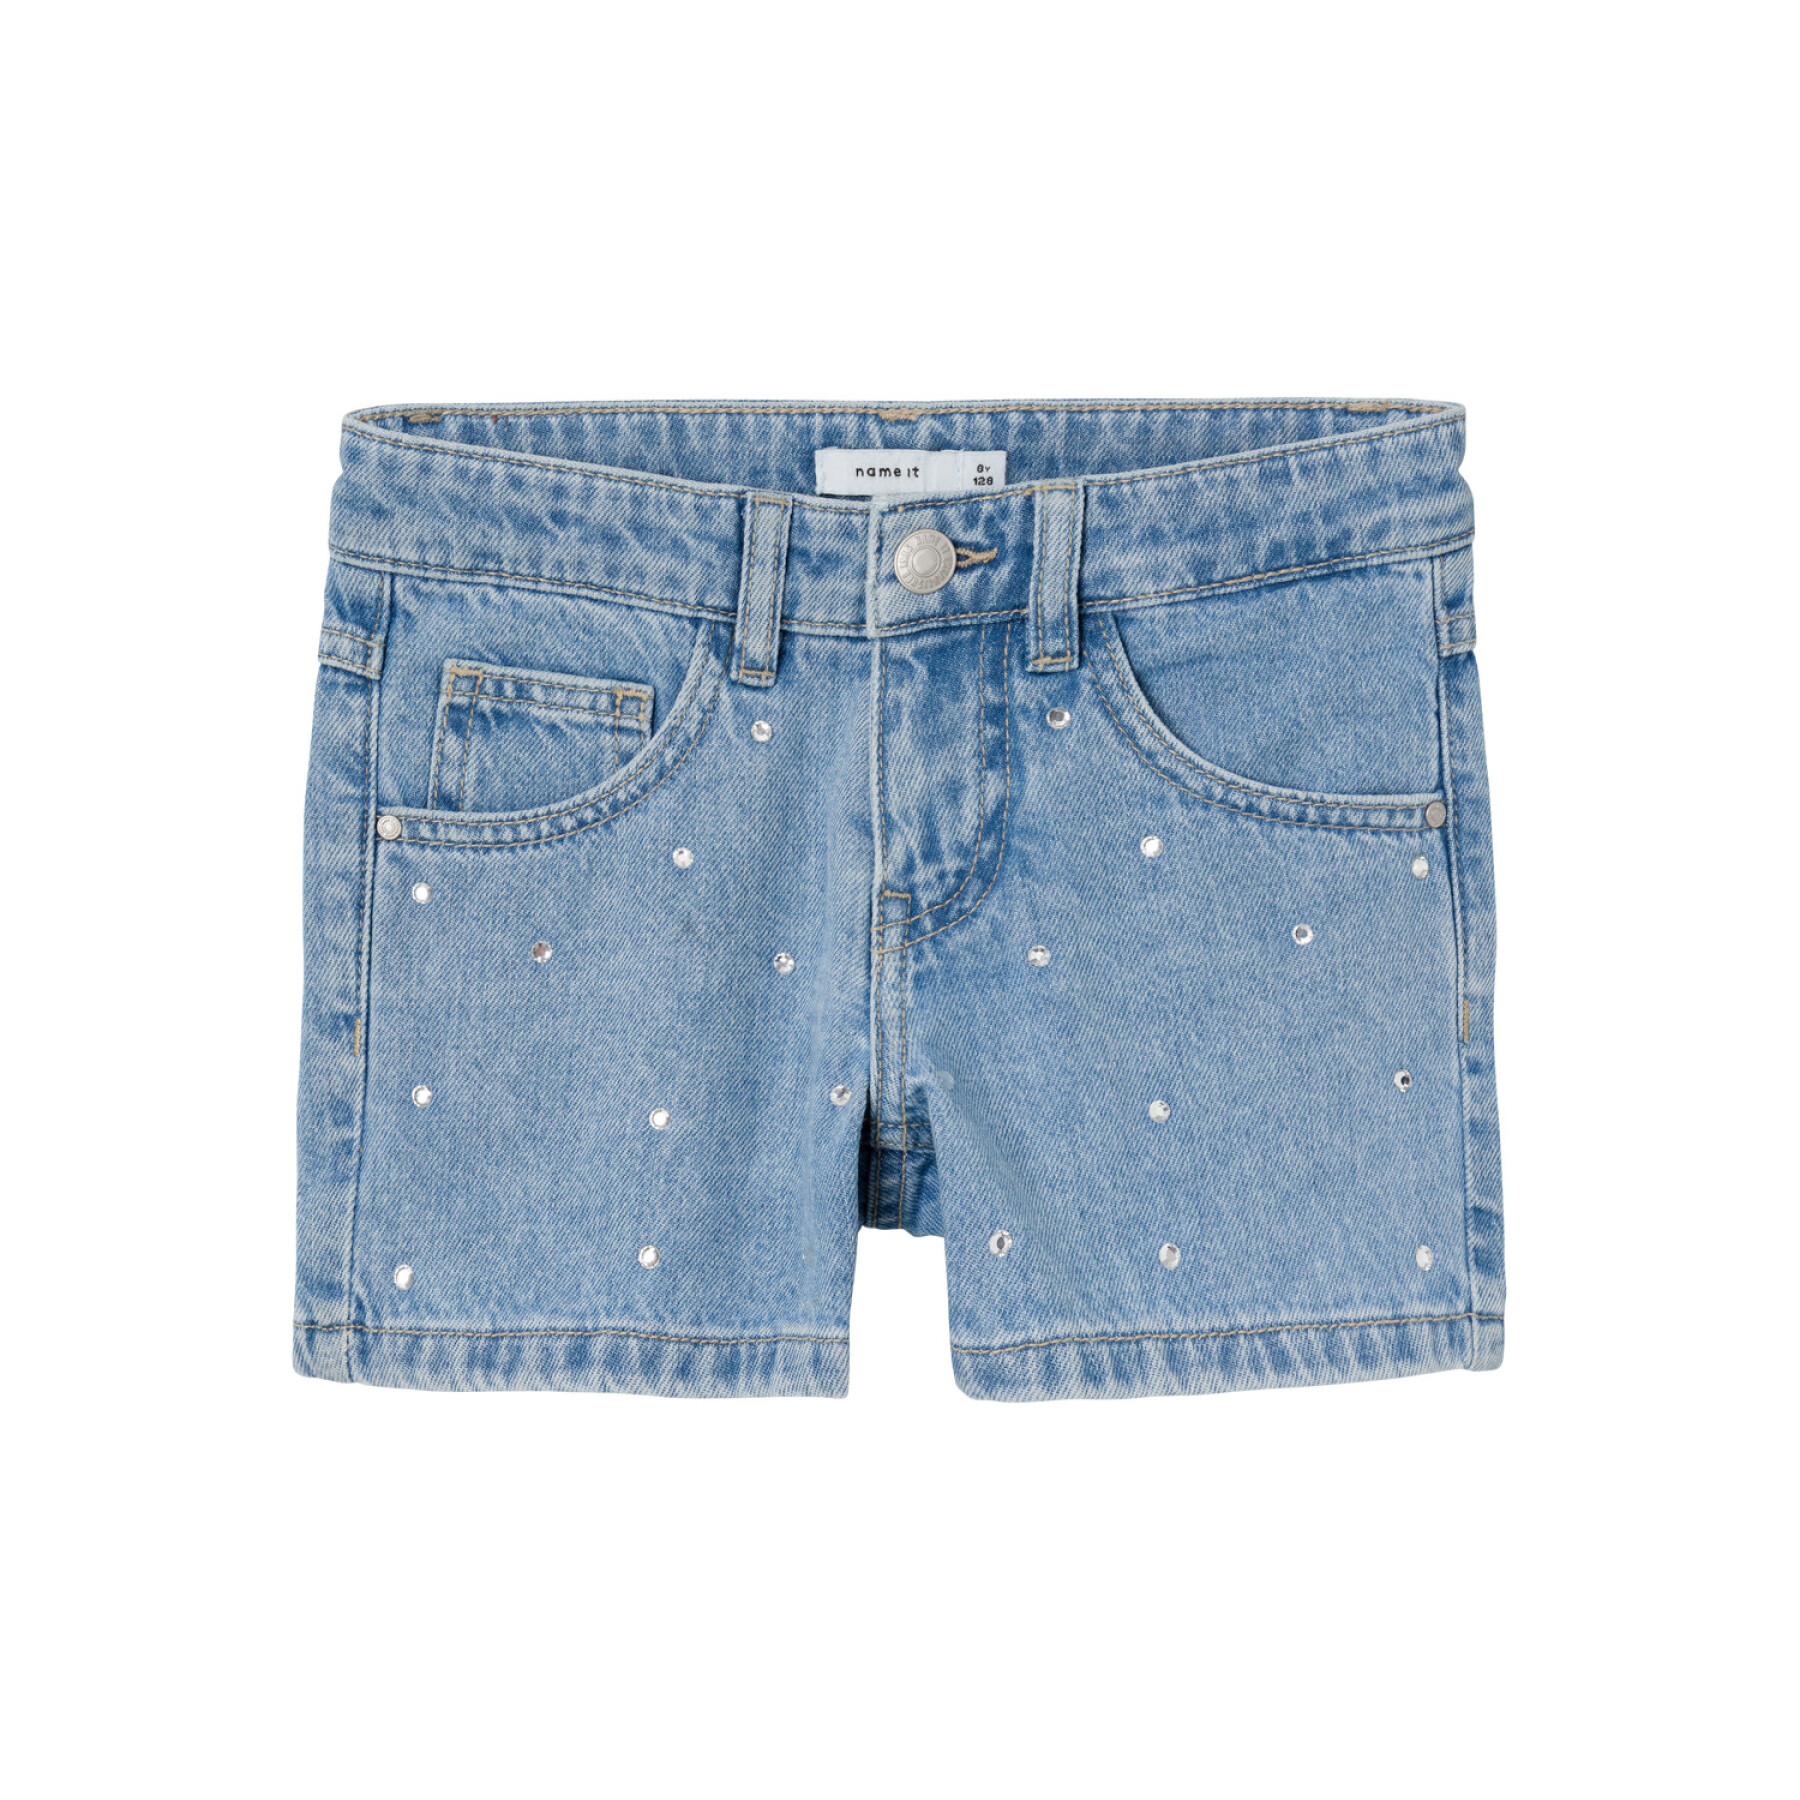 Girl's shorts Name it Rose 3366-BE